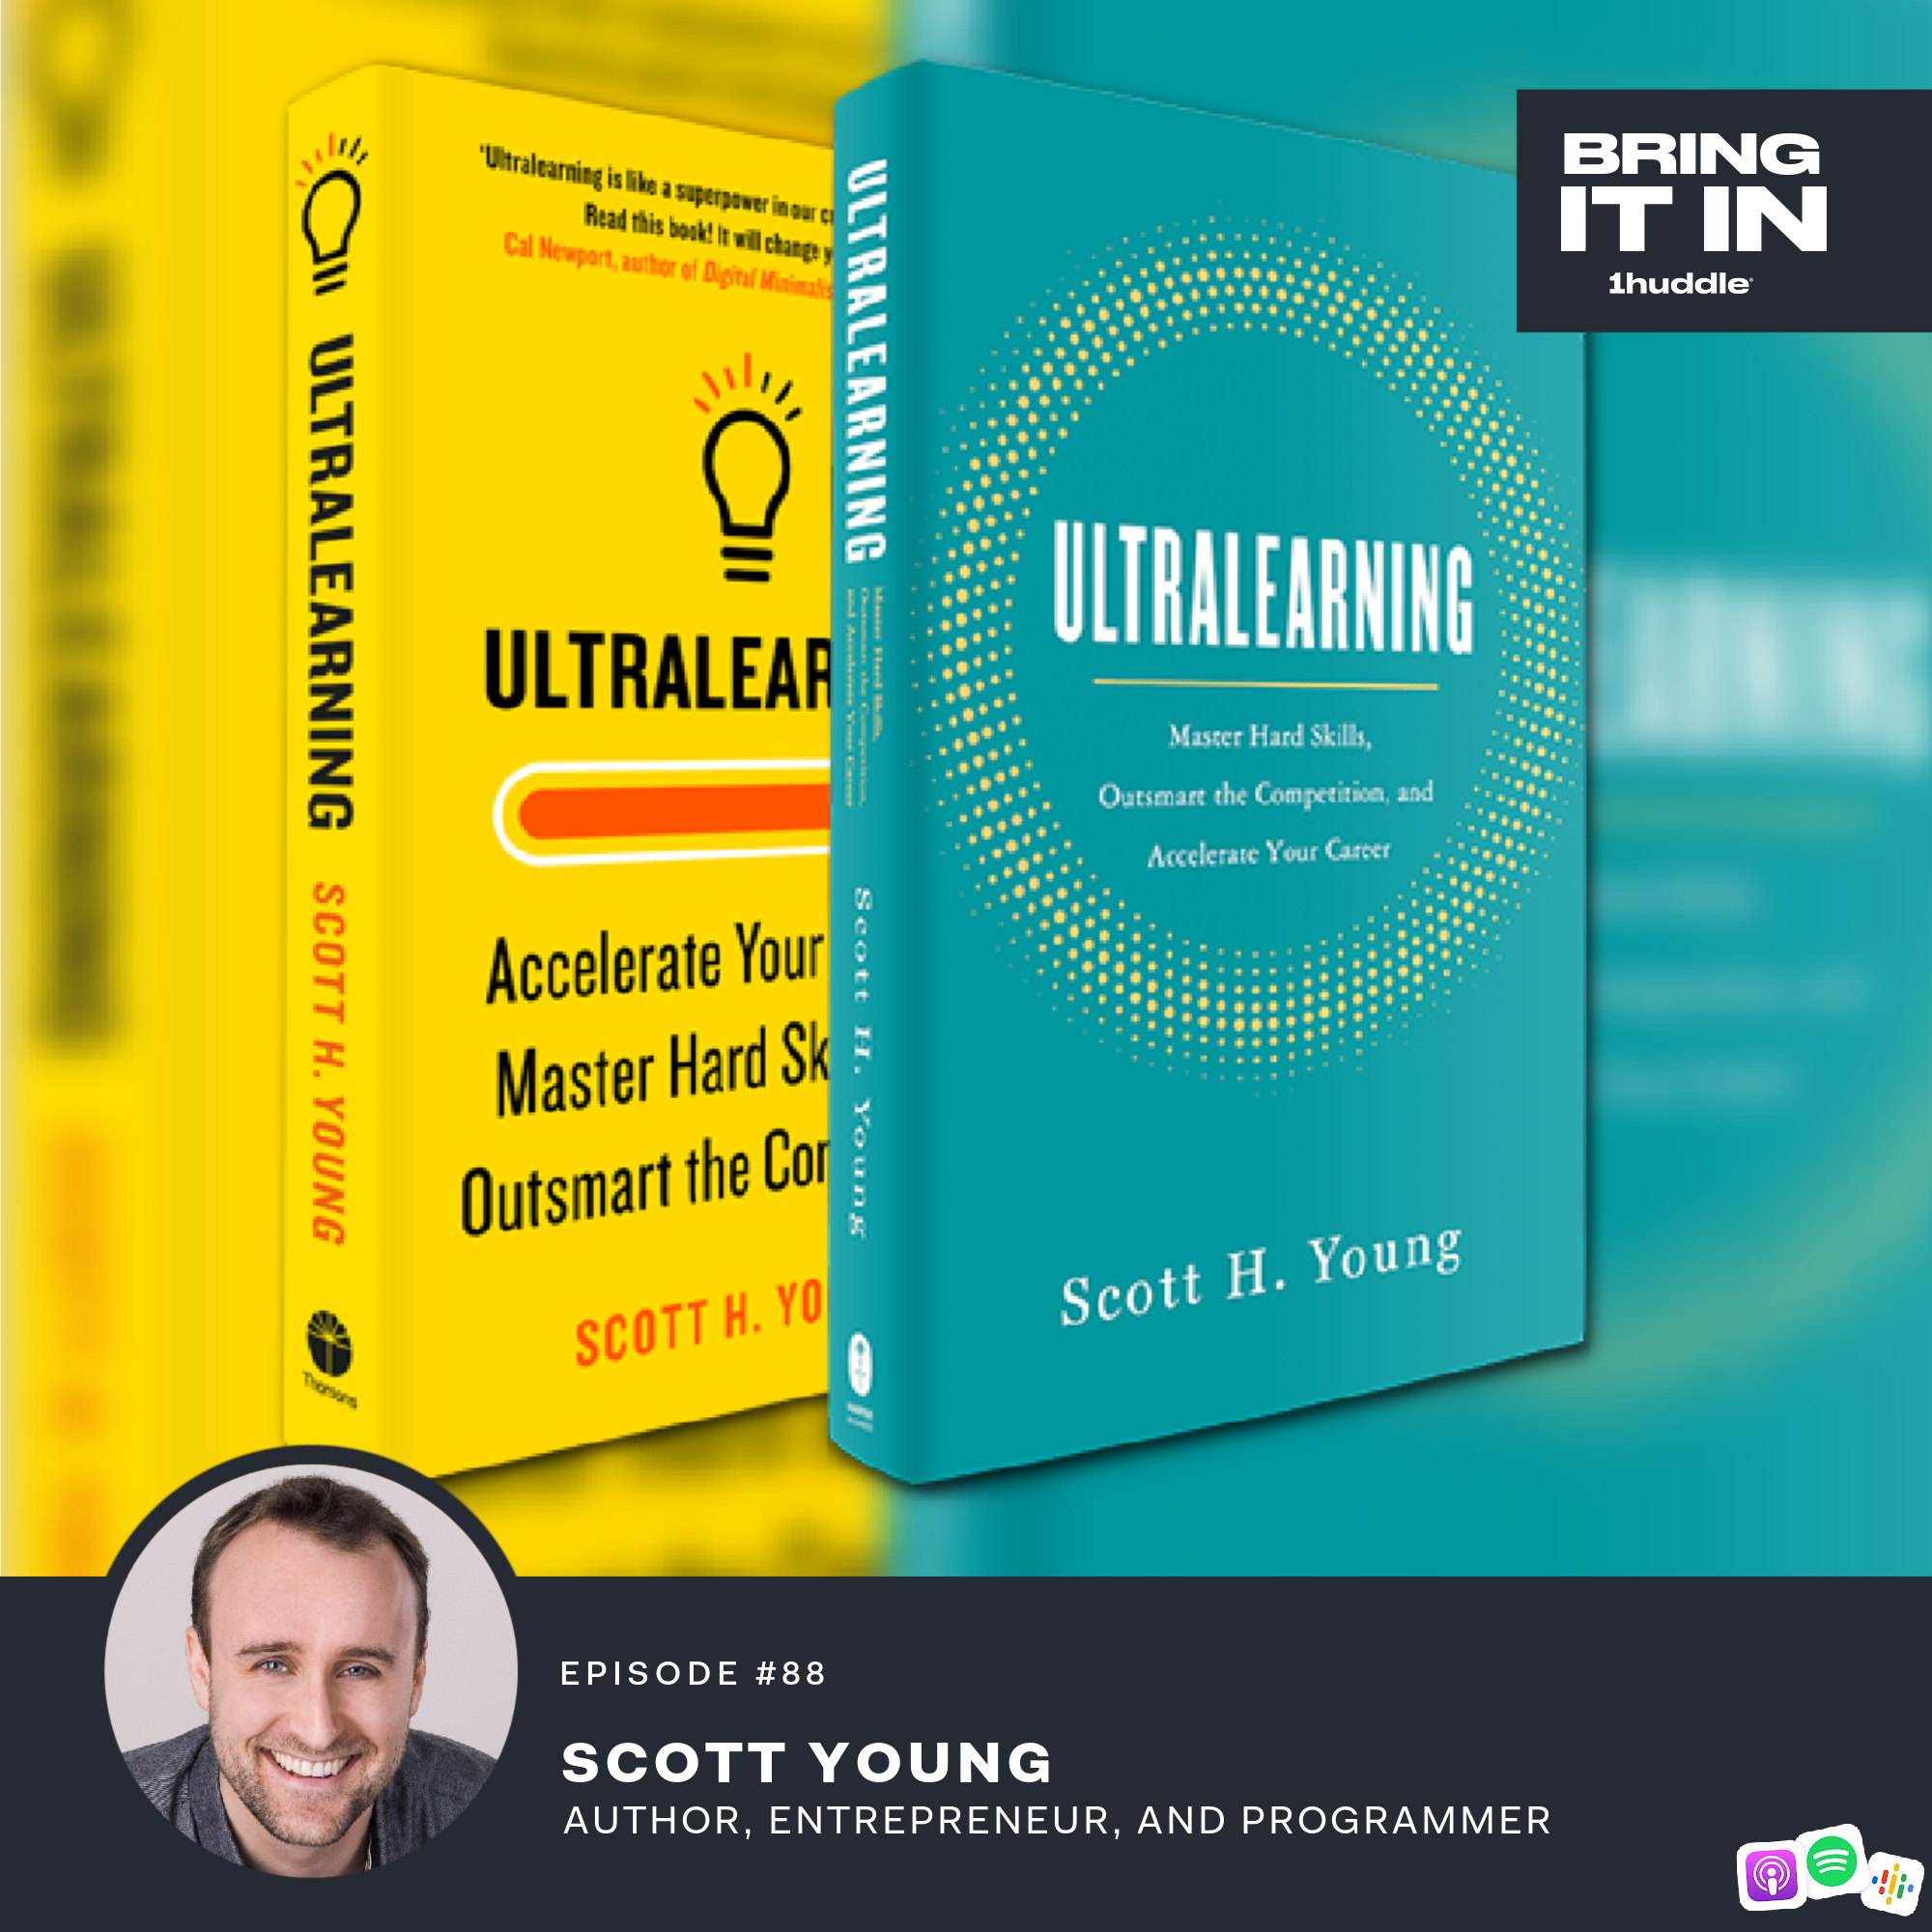 Author of “Ultralearning: Master Hard Skills, Outsmart the Competition, and Accelerate Your Career,” Entrepreneur, and Programmer